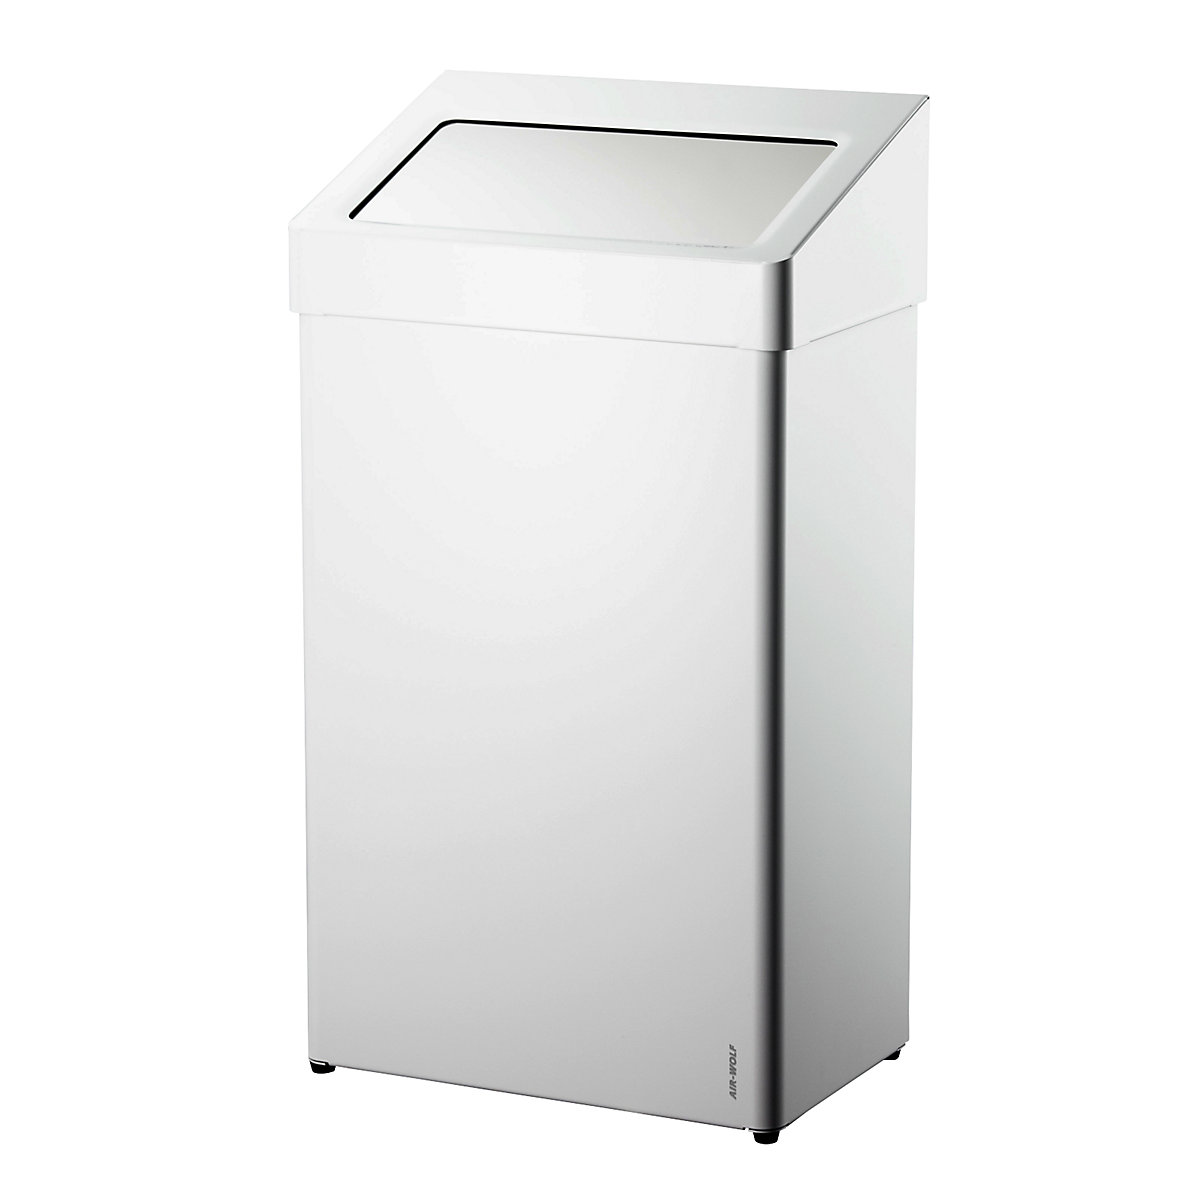 Waste collector with hood – AIR-WOLF, capacity 60 l, WxHxD 400 x 726 x 258 mm, stainless steel, white powder coated-2